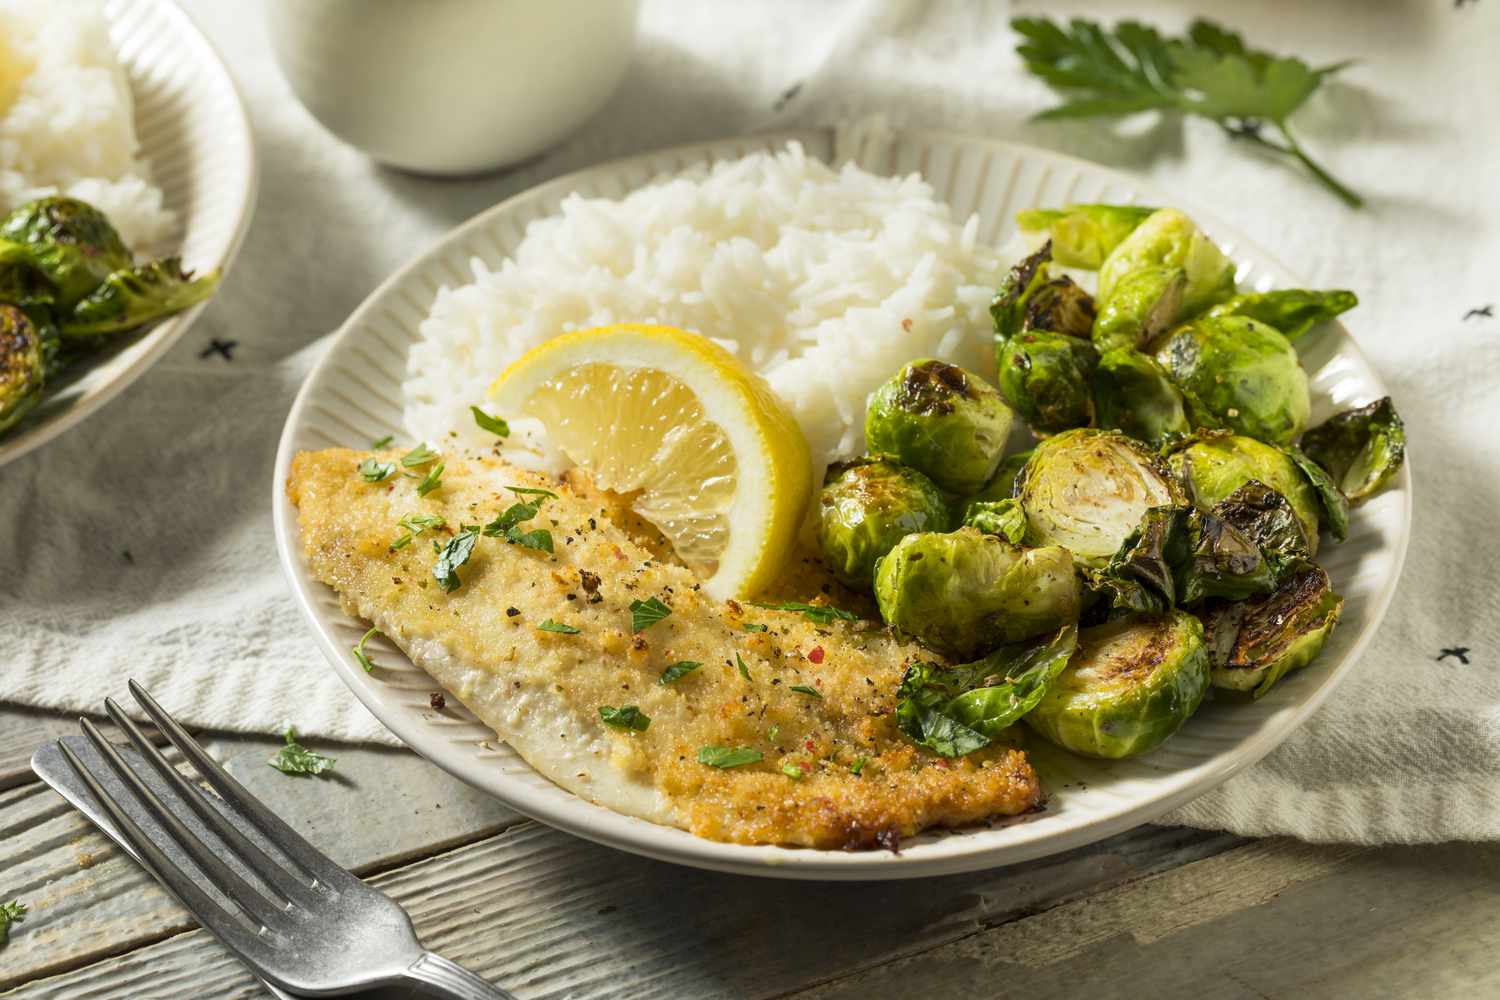 Plate of fish, Brussels sprouts, and white rice